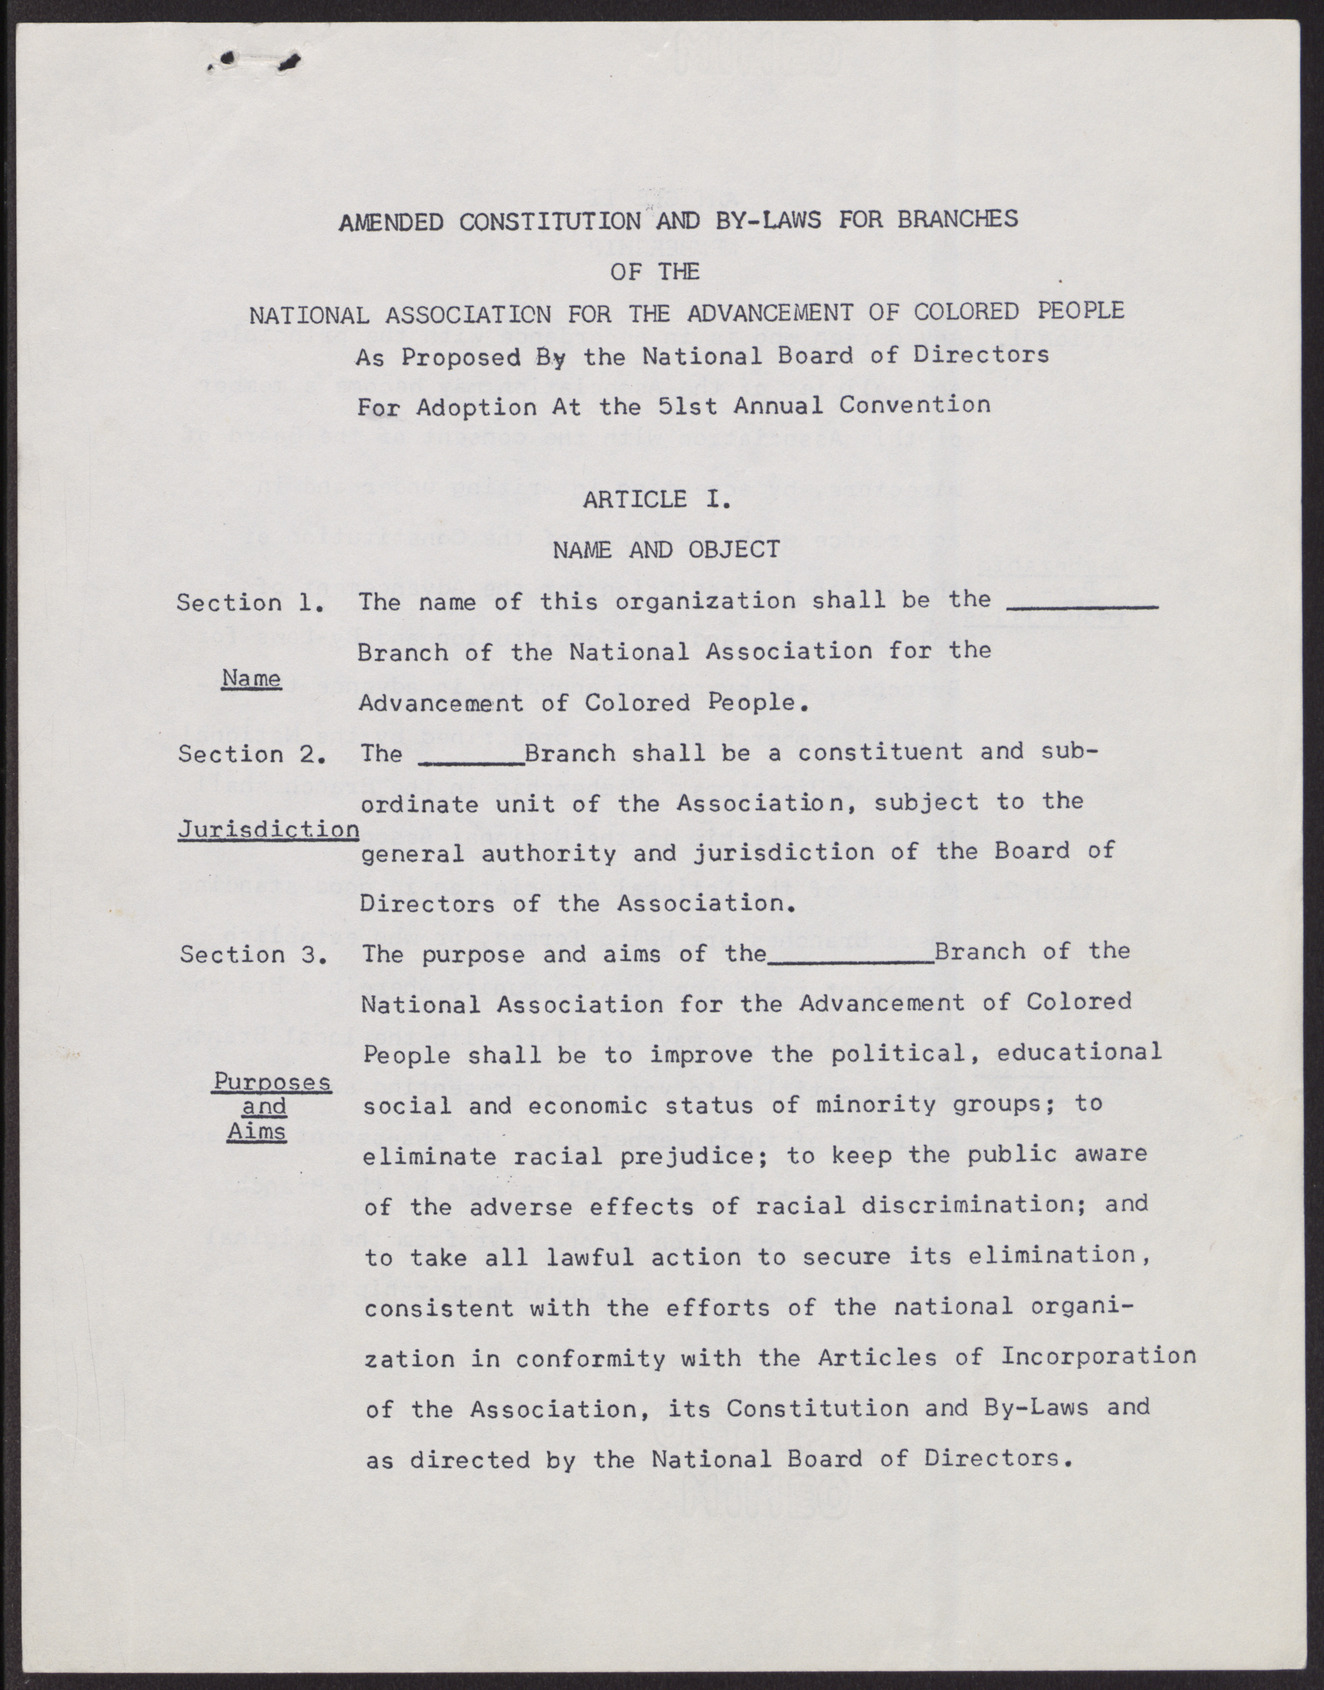 Amended Constitution and By-laws for branches of the NAACP (36 pages), no date